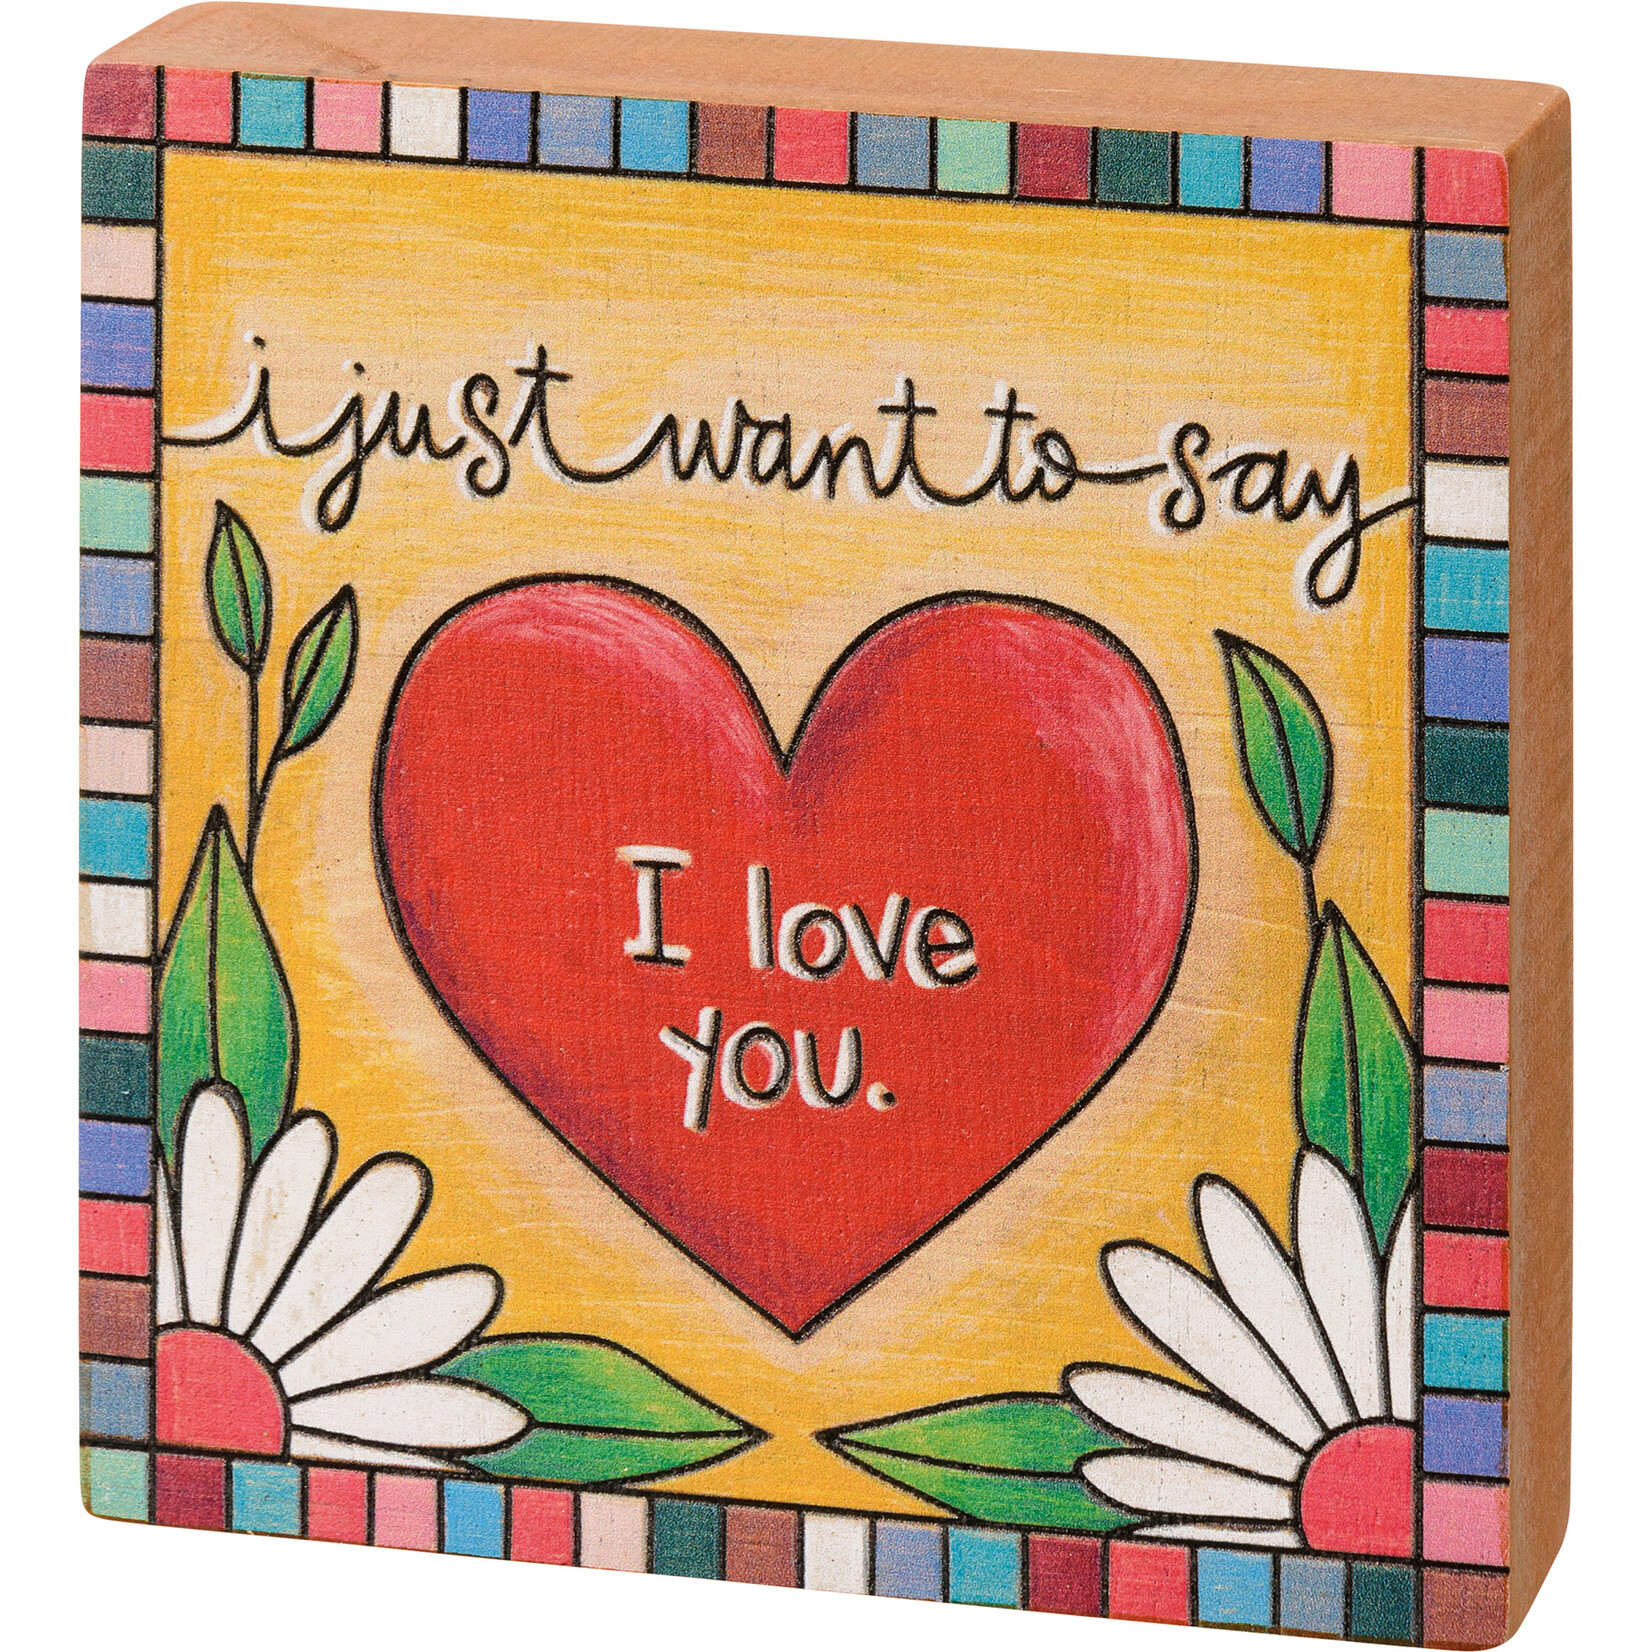 Primitives by Kathy Primitives by Kathy- Just Want To Say I Love You Block Sign